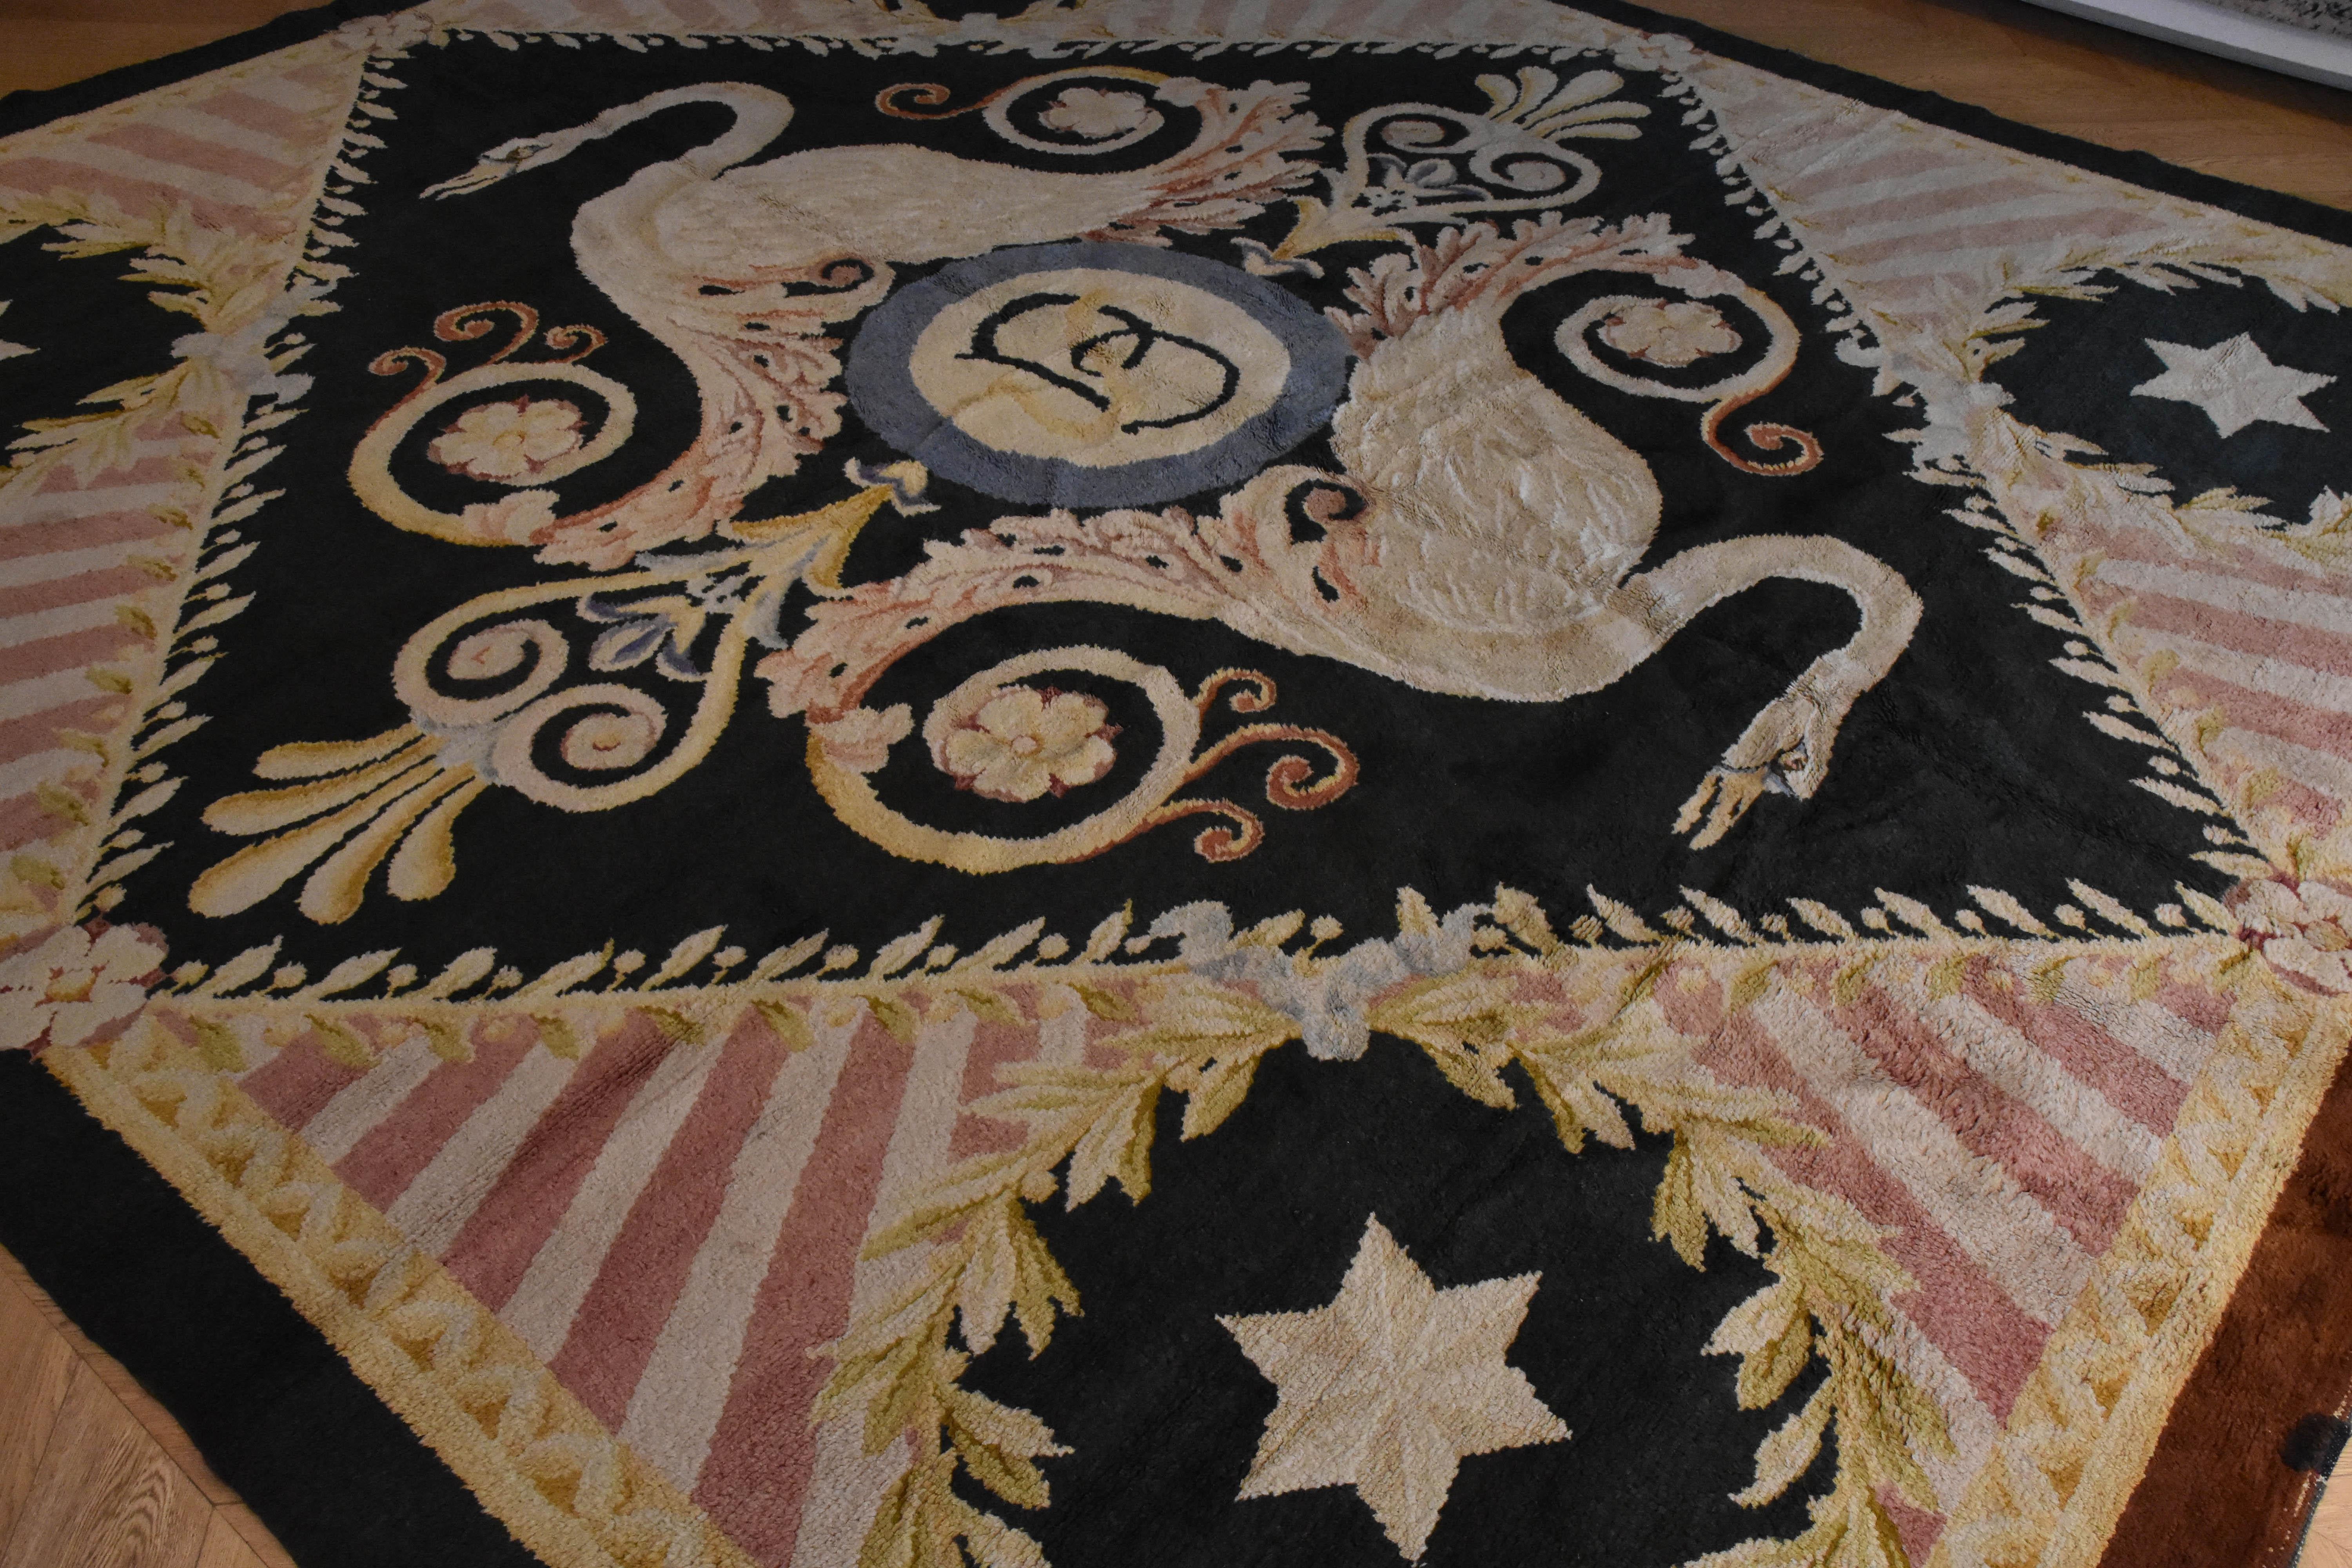 20th Century Blue and White Floreal Swans Rug by Reginald Toms, circa 1920 For Sale 9